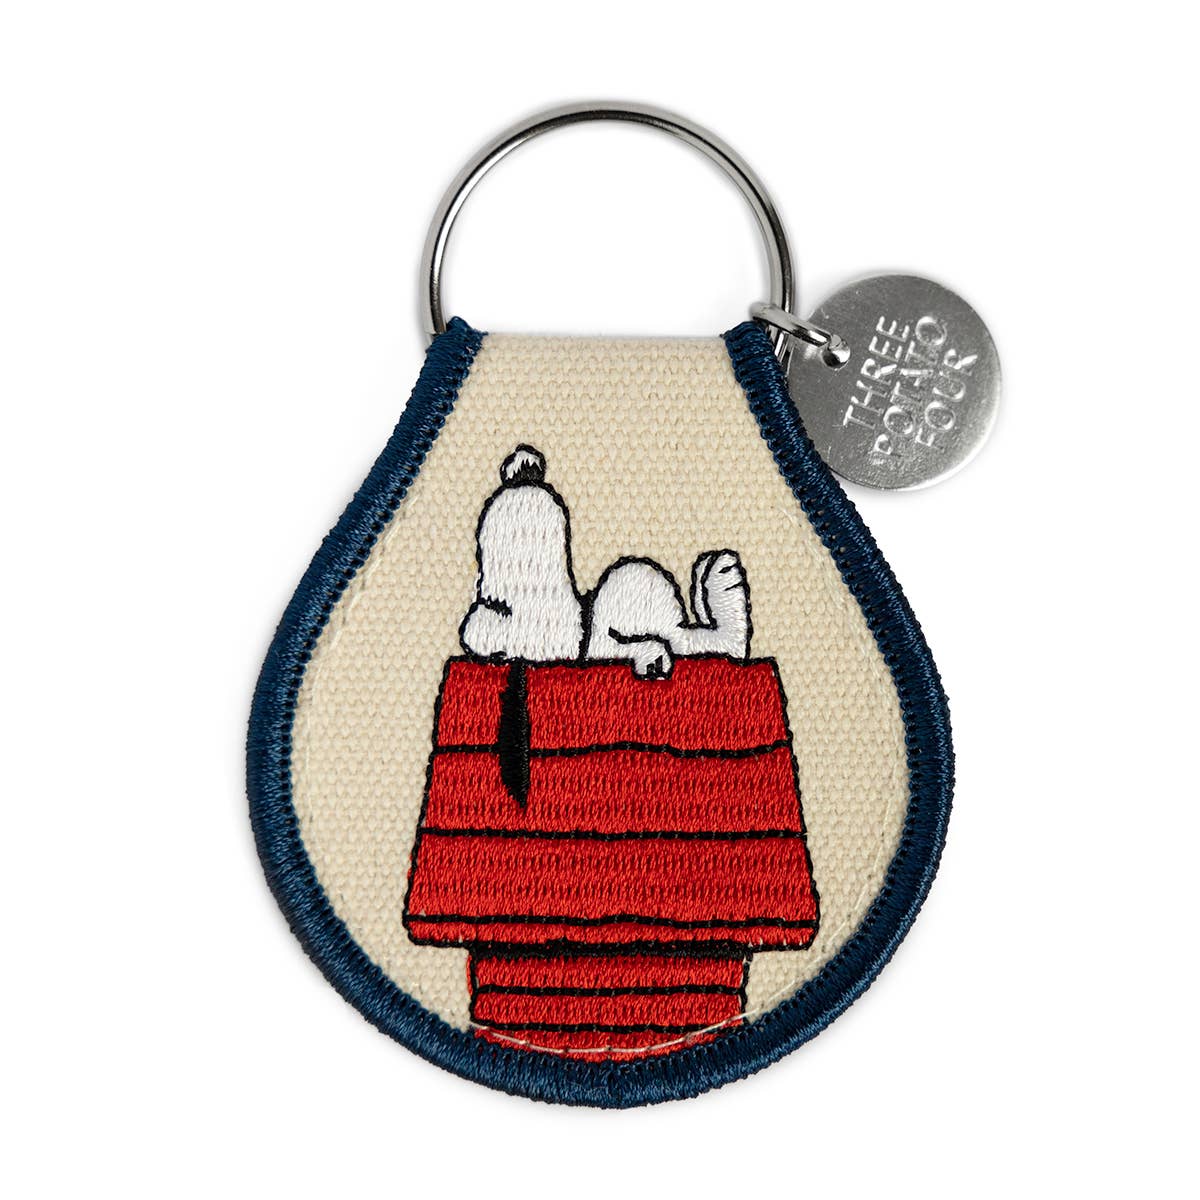 A Snoopy Keychain from Three Potato Four featuring Snoopy's doghouse.